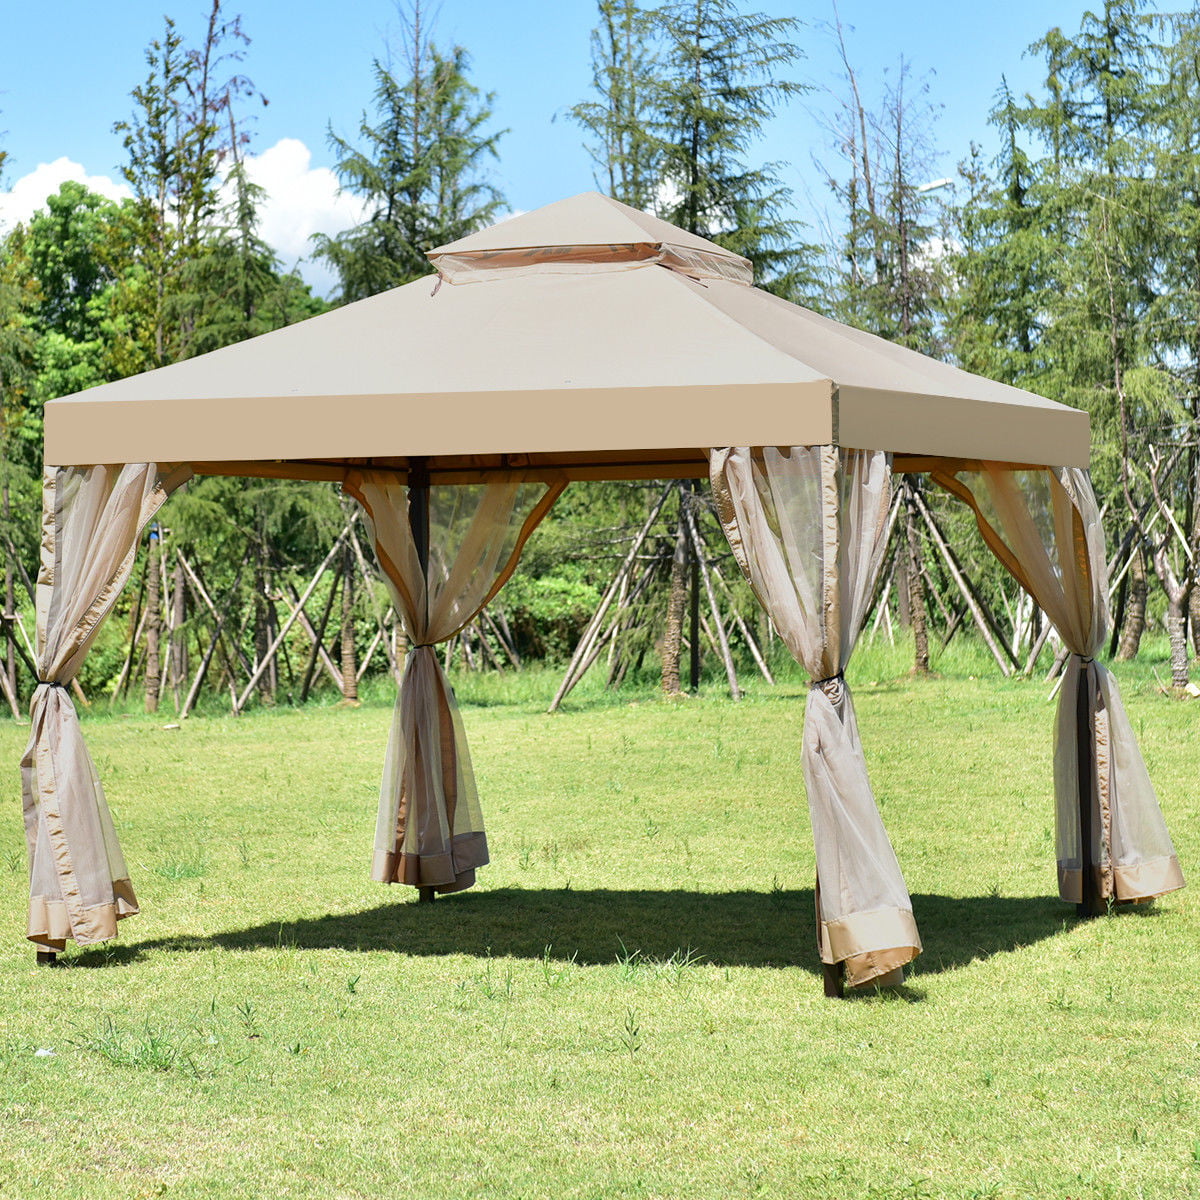 Costway Outdoor 2 Tier 10x10 Gazebo Canopy Shelter Awning Tent